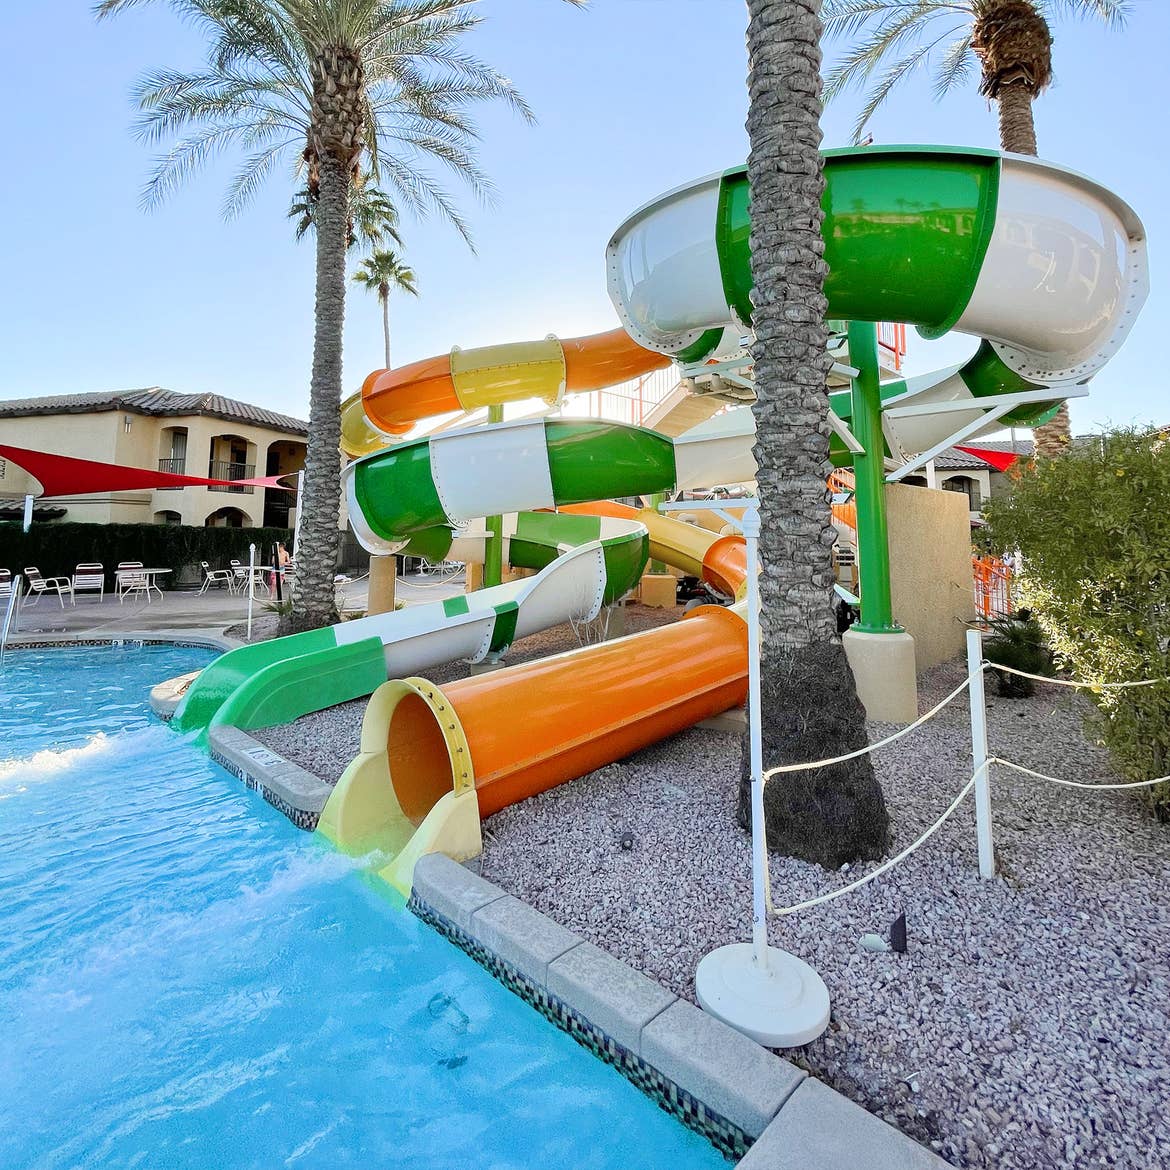 Two swirling waterslides, one green and white the other orange, are surrounded by palm trees and a pool.